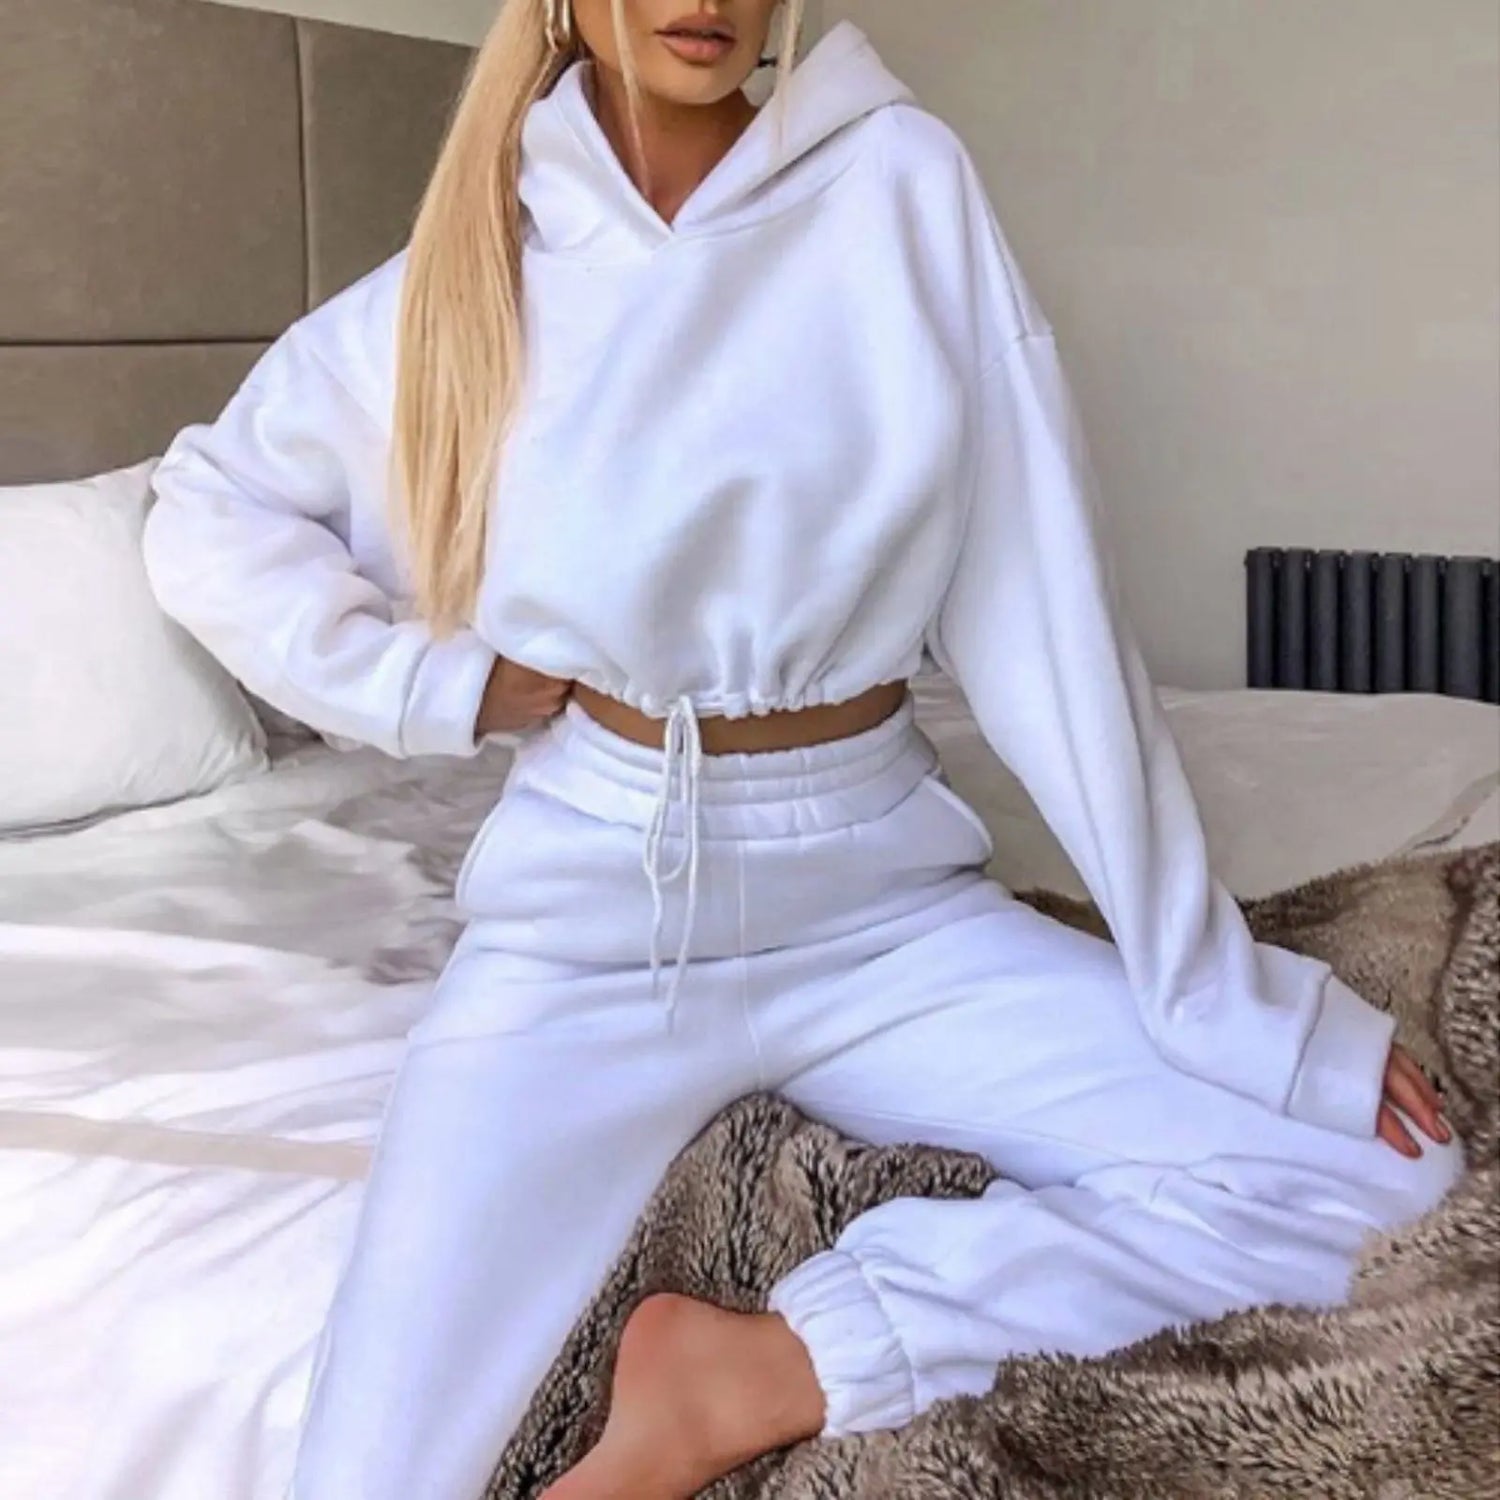 dresses  | Jogging Suits For Women 2 Piece Sweatsuits Tracksuits Sexy Long Sleeve HoodieCasual Fitness Sportswear | Big White |  L| thecurvestory.myshopify.com